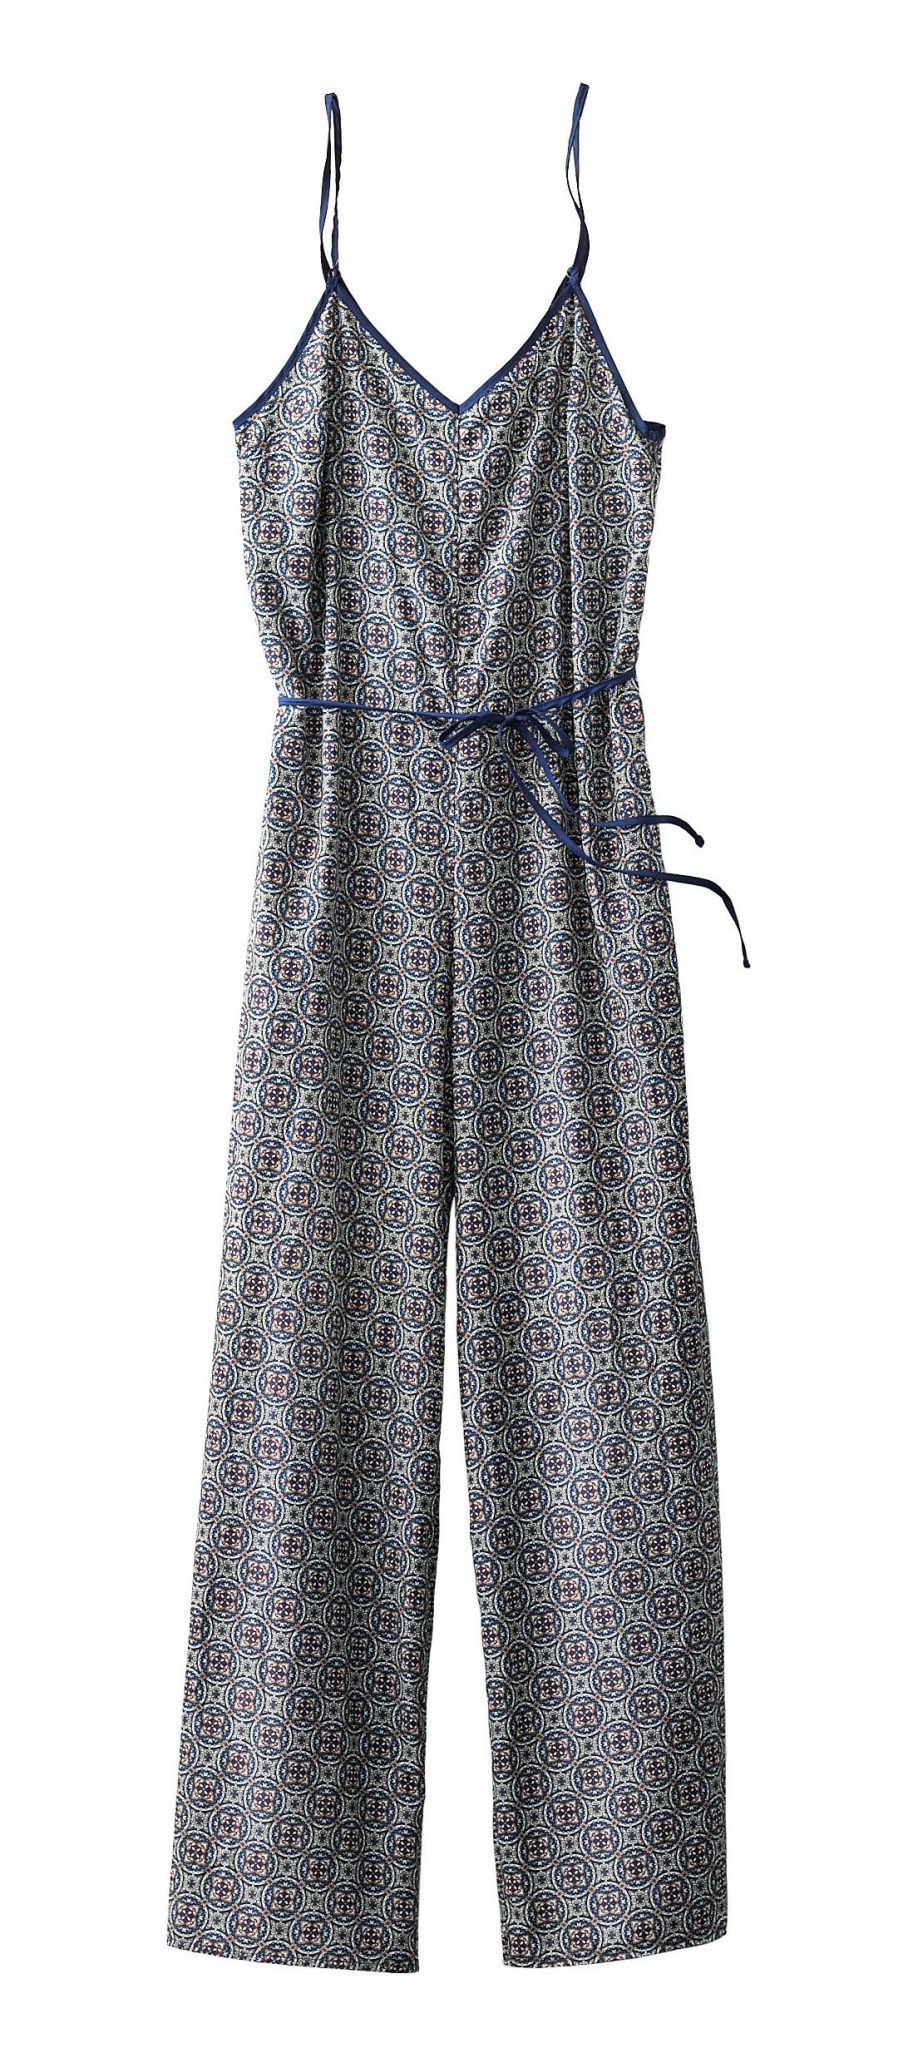  Printed Jumpsuit  $19.99  Compare at $40 